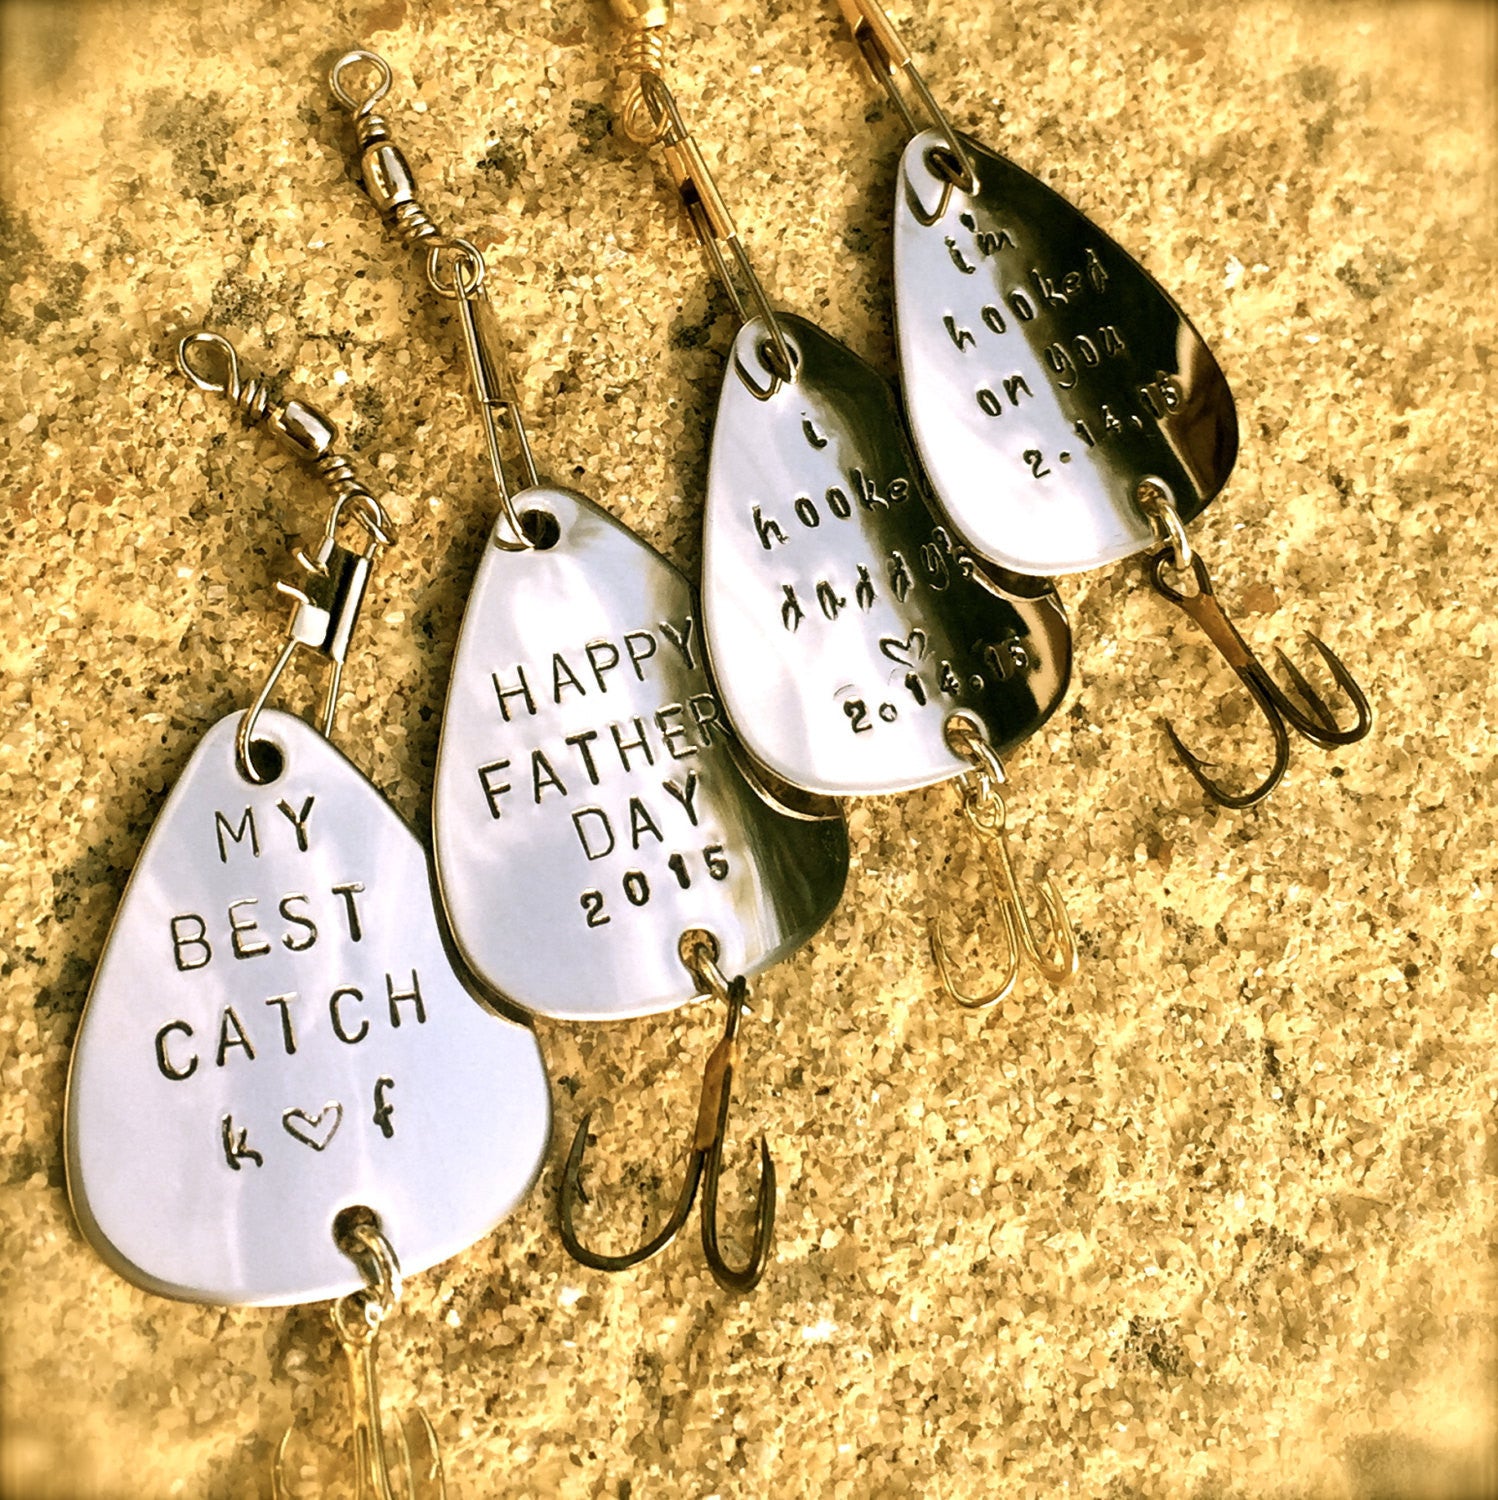 Fishing Lure, Husband Gift,My Forever Fishing Buddy, For Him, Boyfriend Gift, fishing buddy,Personalized Fishing Lure - Natashaaloha, jewelry, bracelets, necklace, keychains, fishing lures, gifts for men, charms, personalized, 